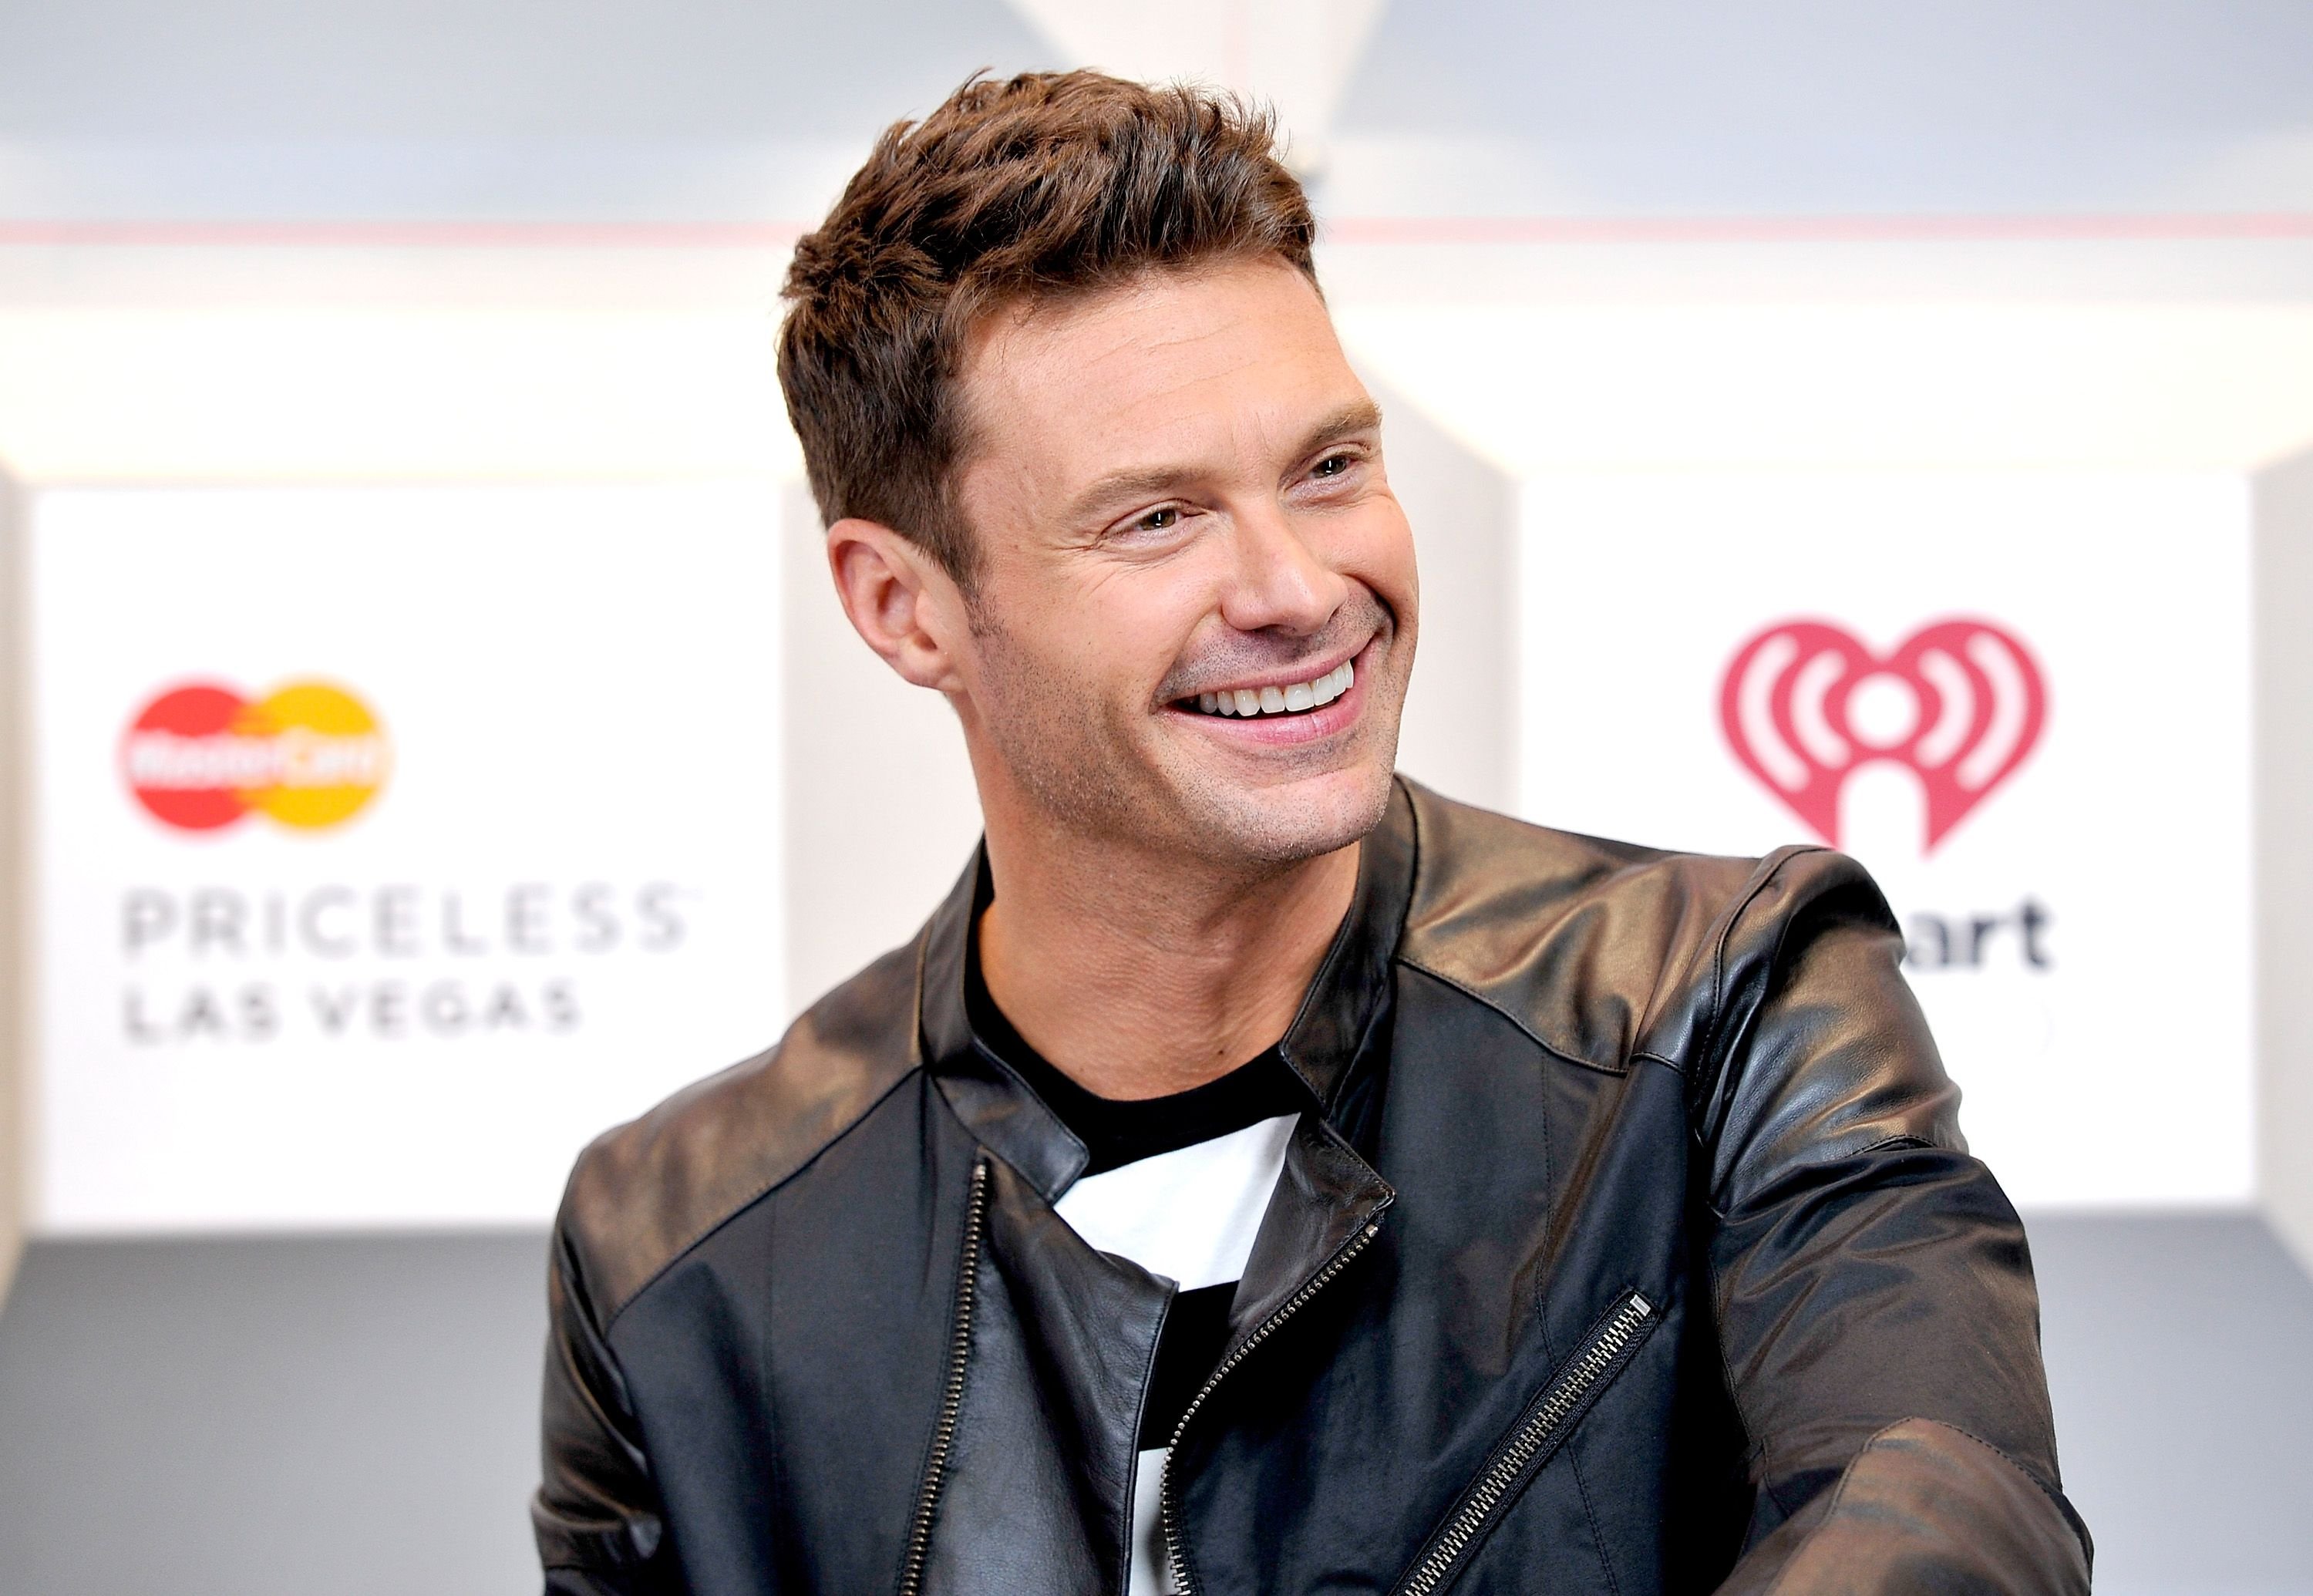 Host Ryan Seacrest at the 2014 iHeartRadio Music Festival at the MGM Grand Garden Arena on September 19, 2014 | Photo: Getty Images